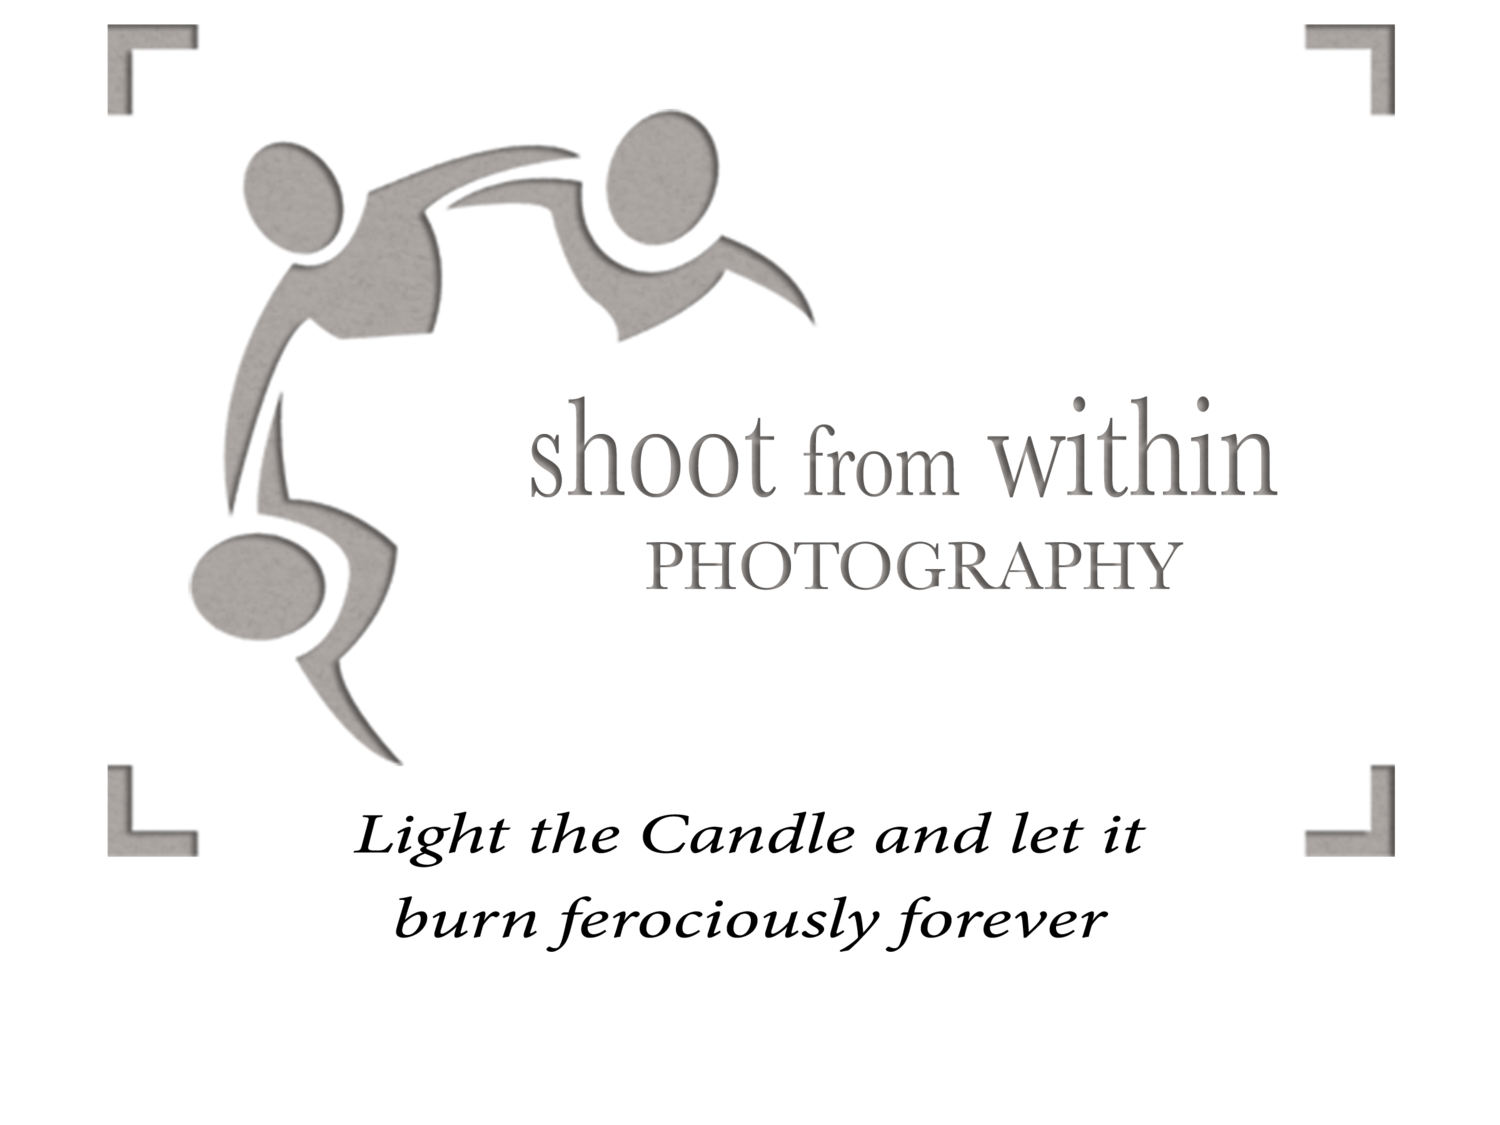 Shoot from Within Photography